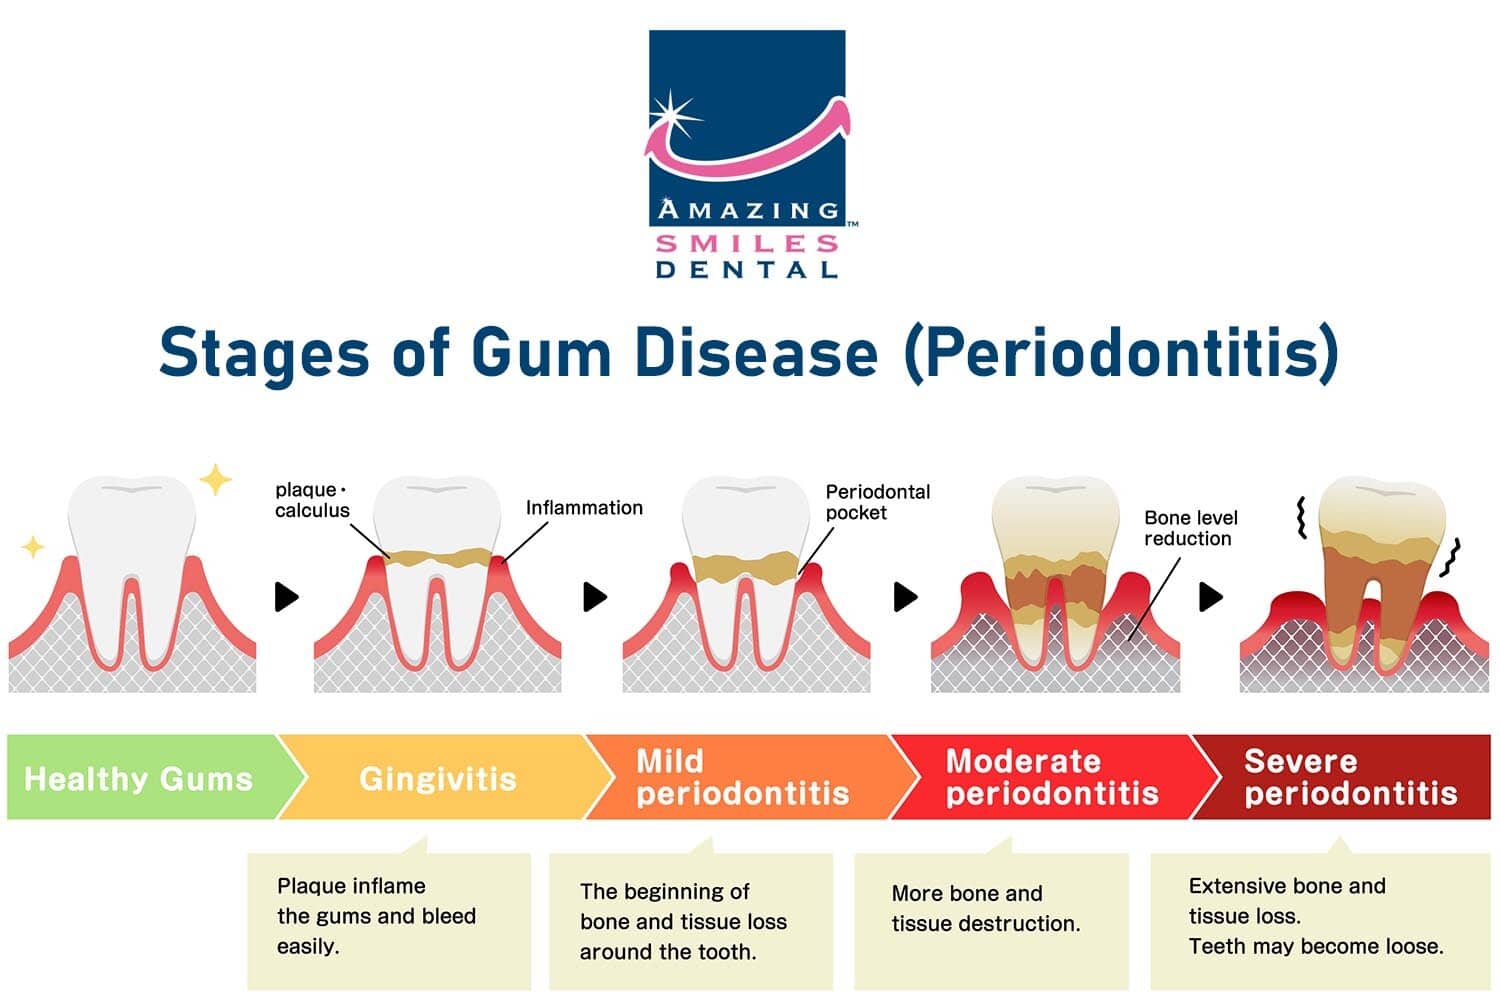 The 5 Stages of Gum Disease: Signs, Symptoms, and Treatment - Old